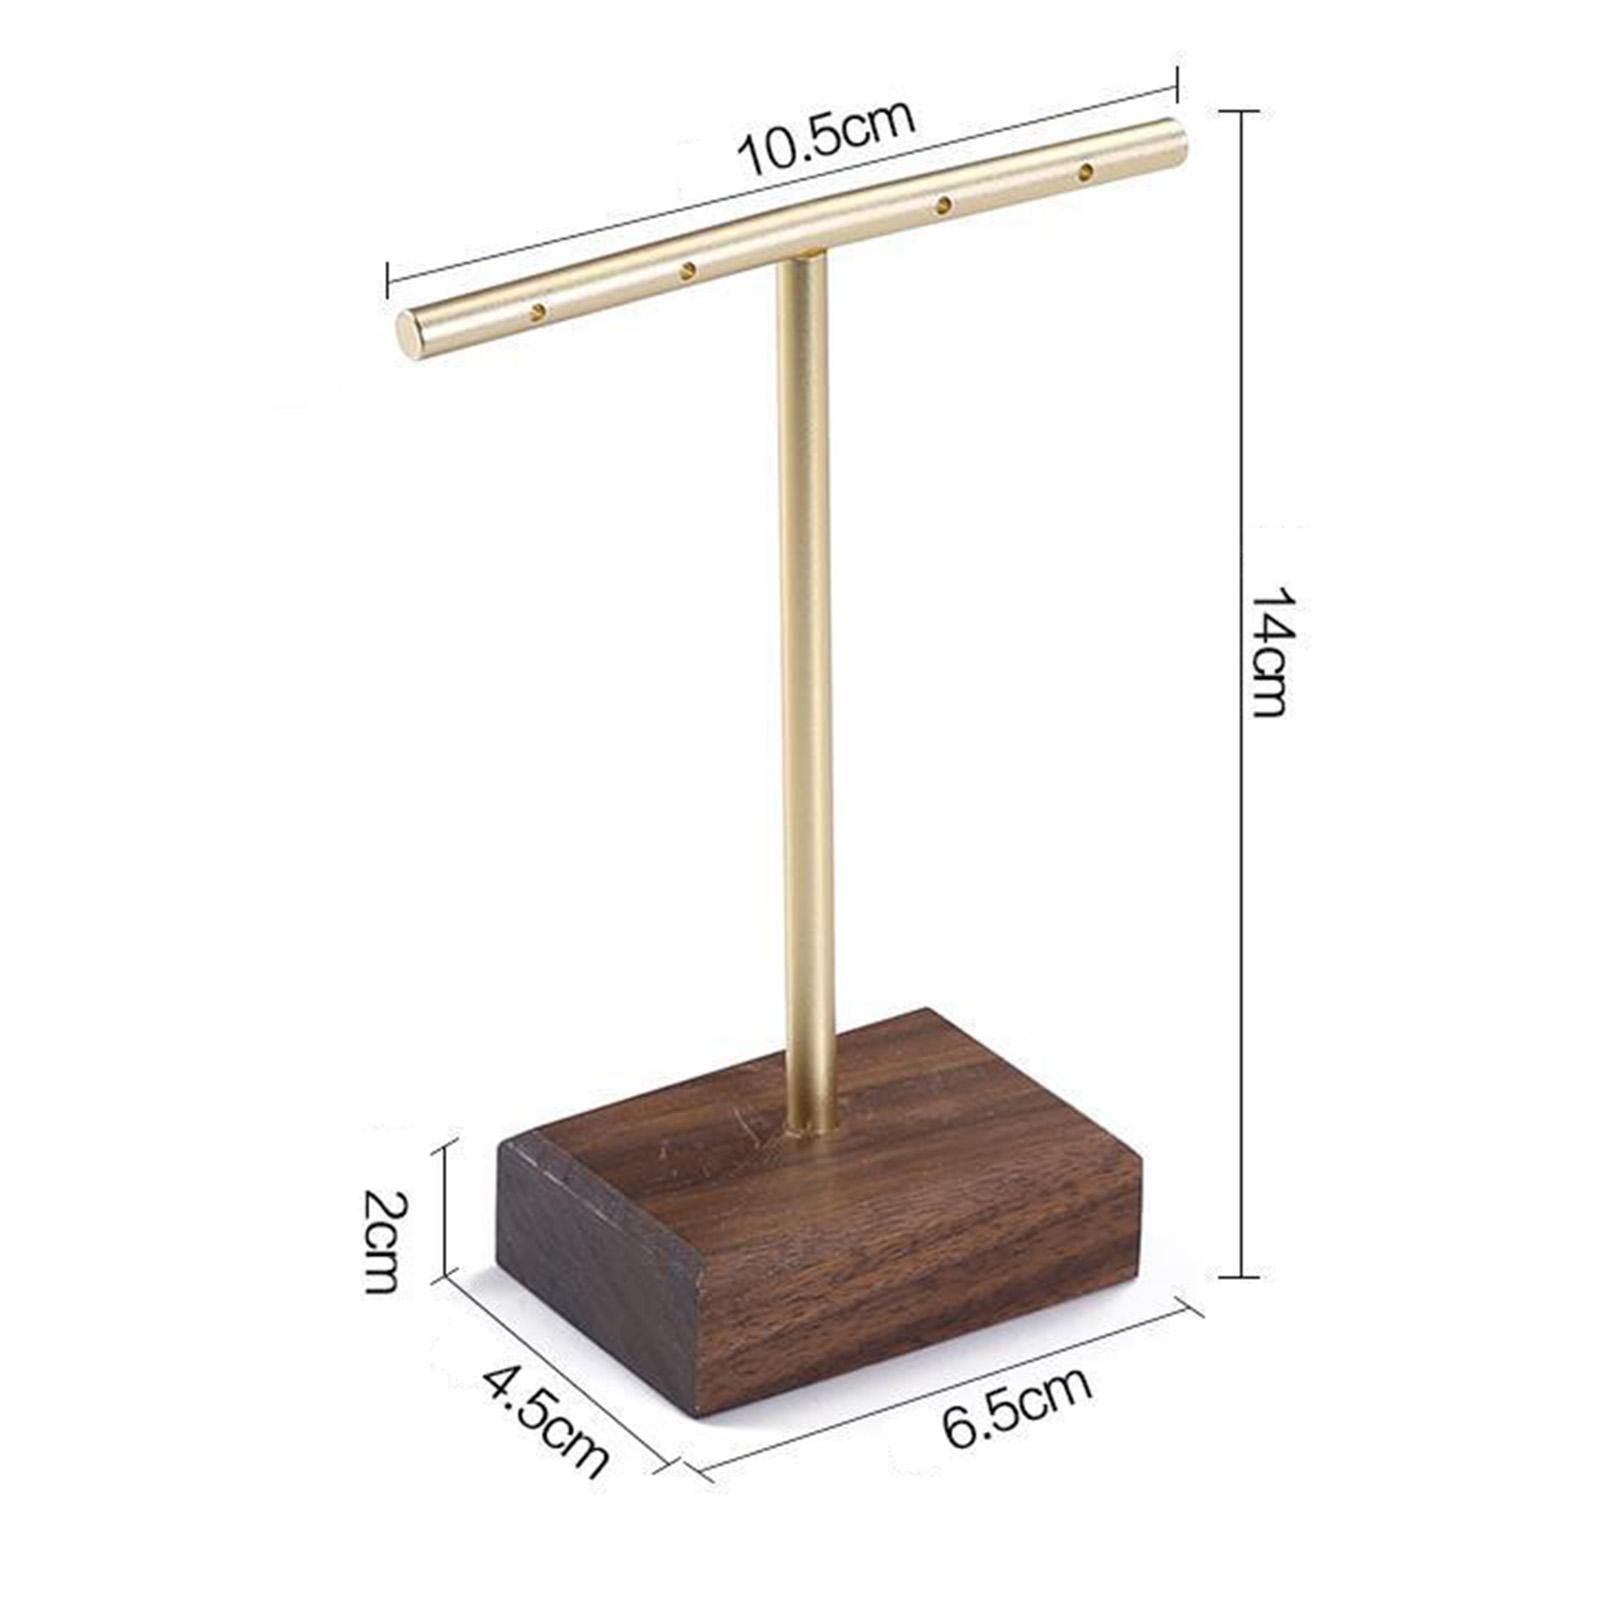 Earring Display Holder, Earring Display Stand Jewelry Organizer for Shop Showroom